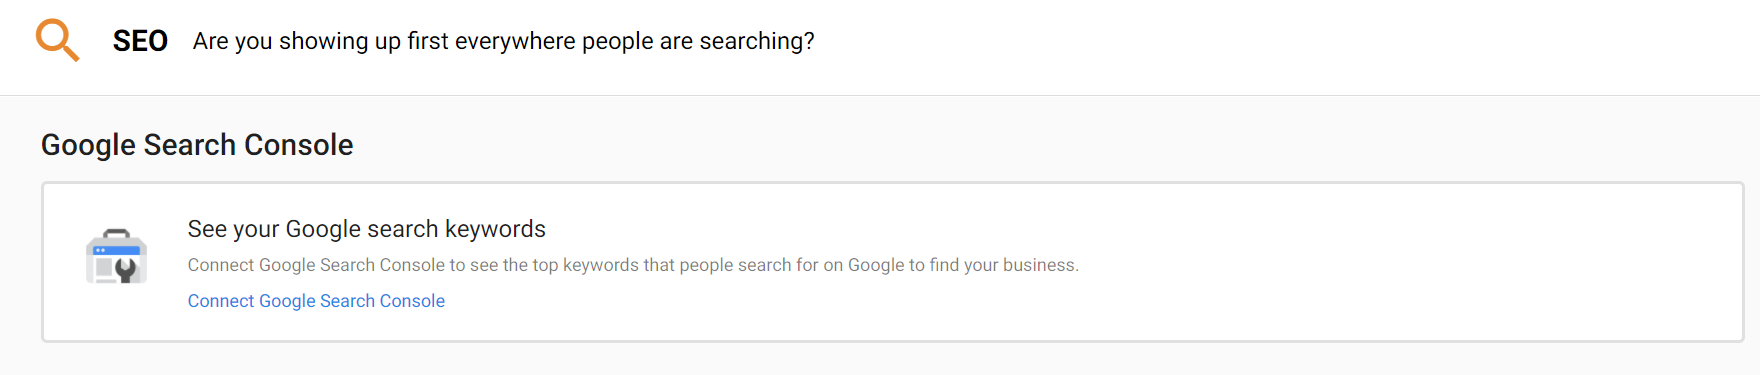 connect_google_search.png